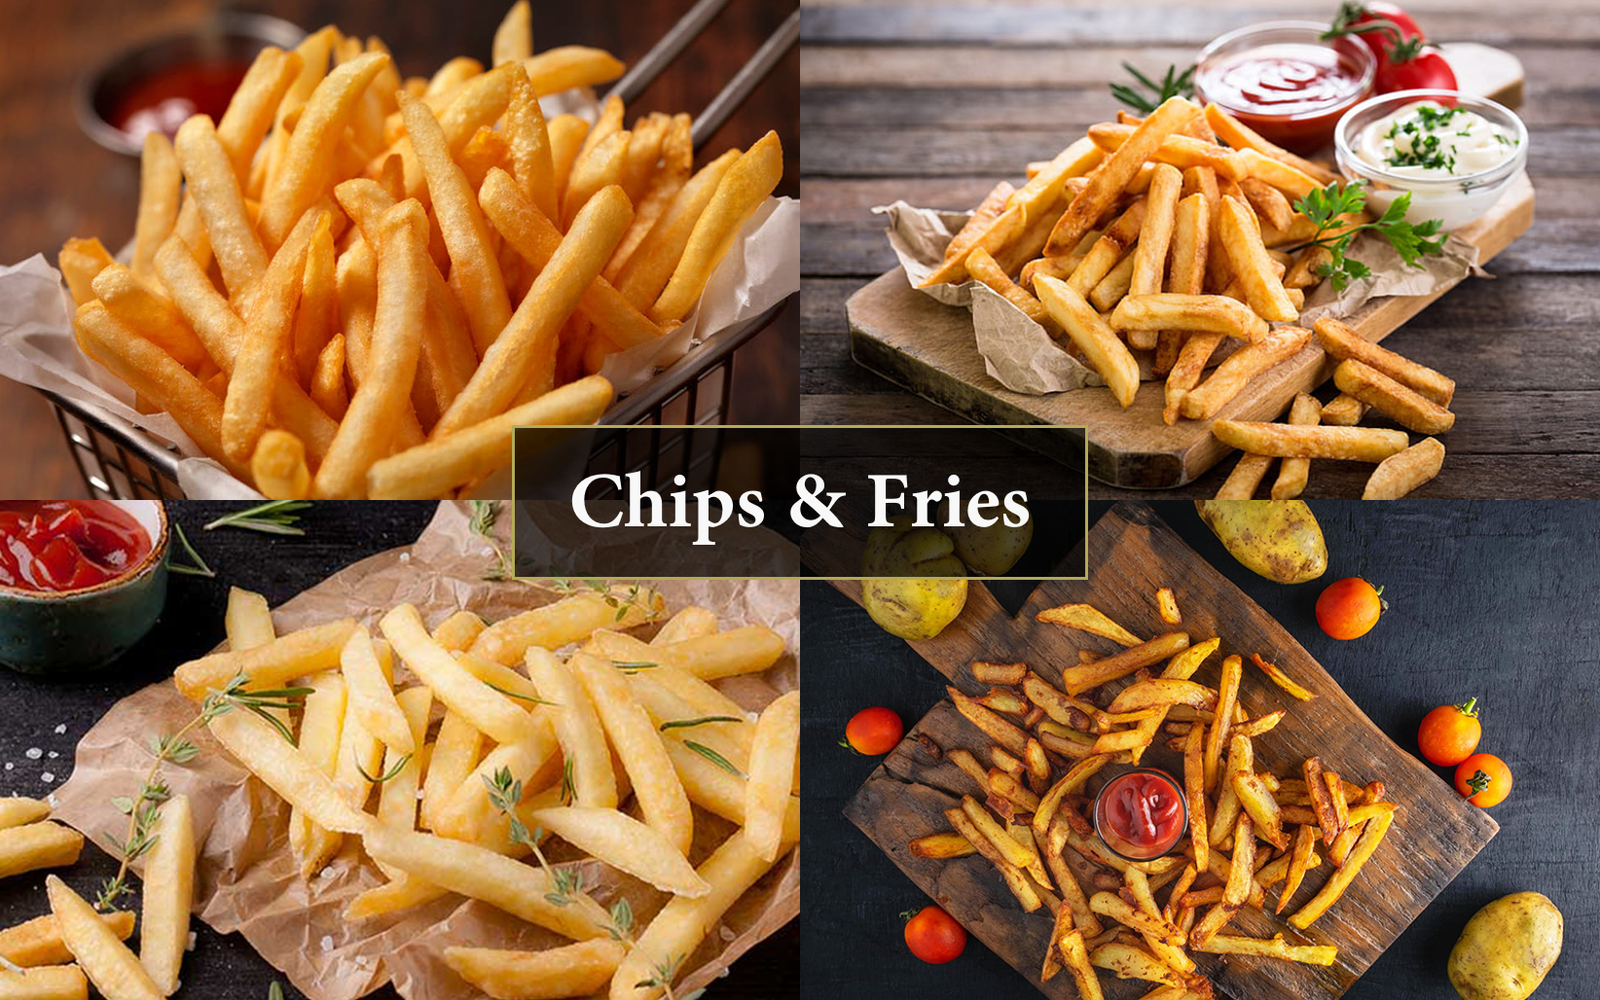  Chips & Fries 